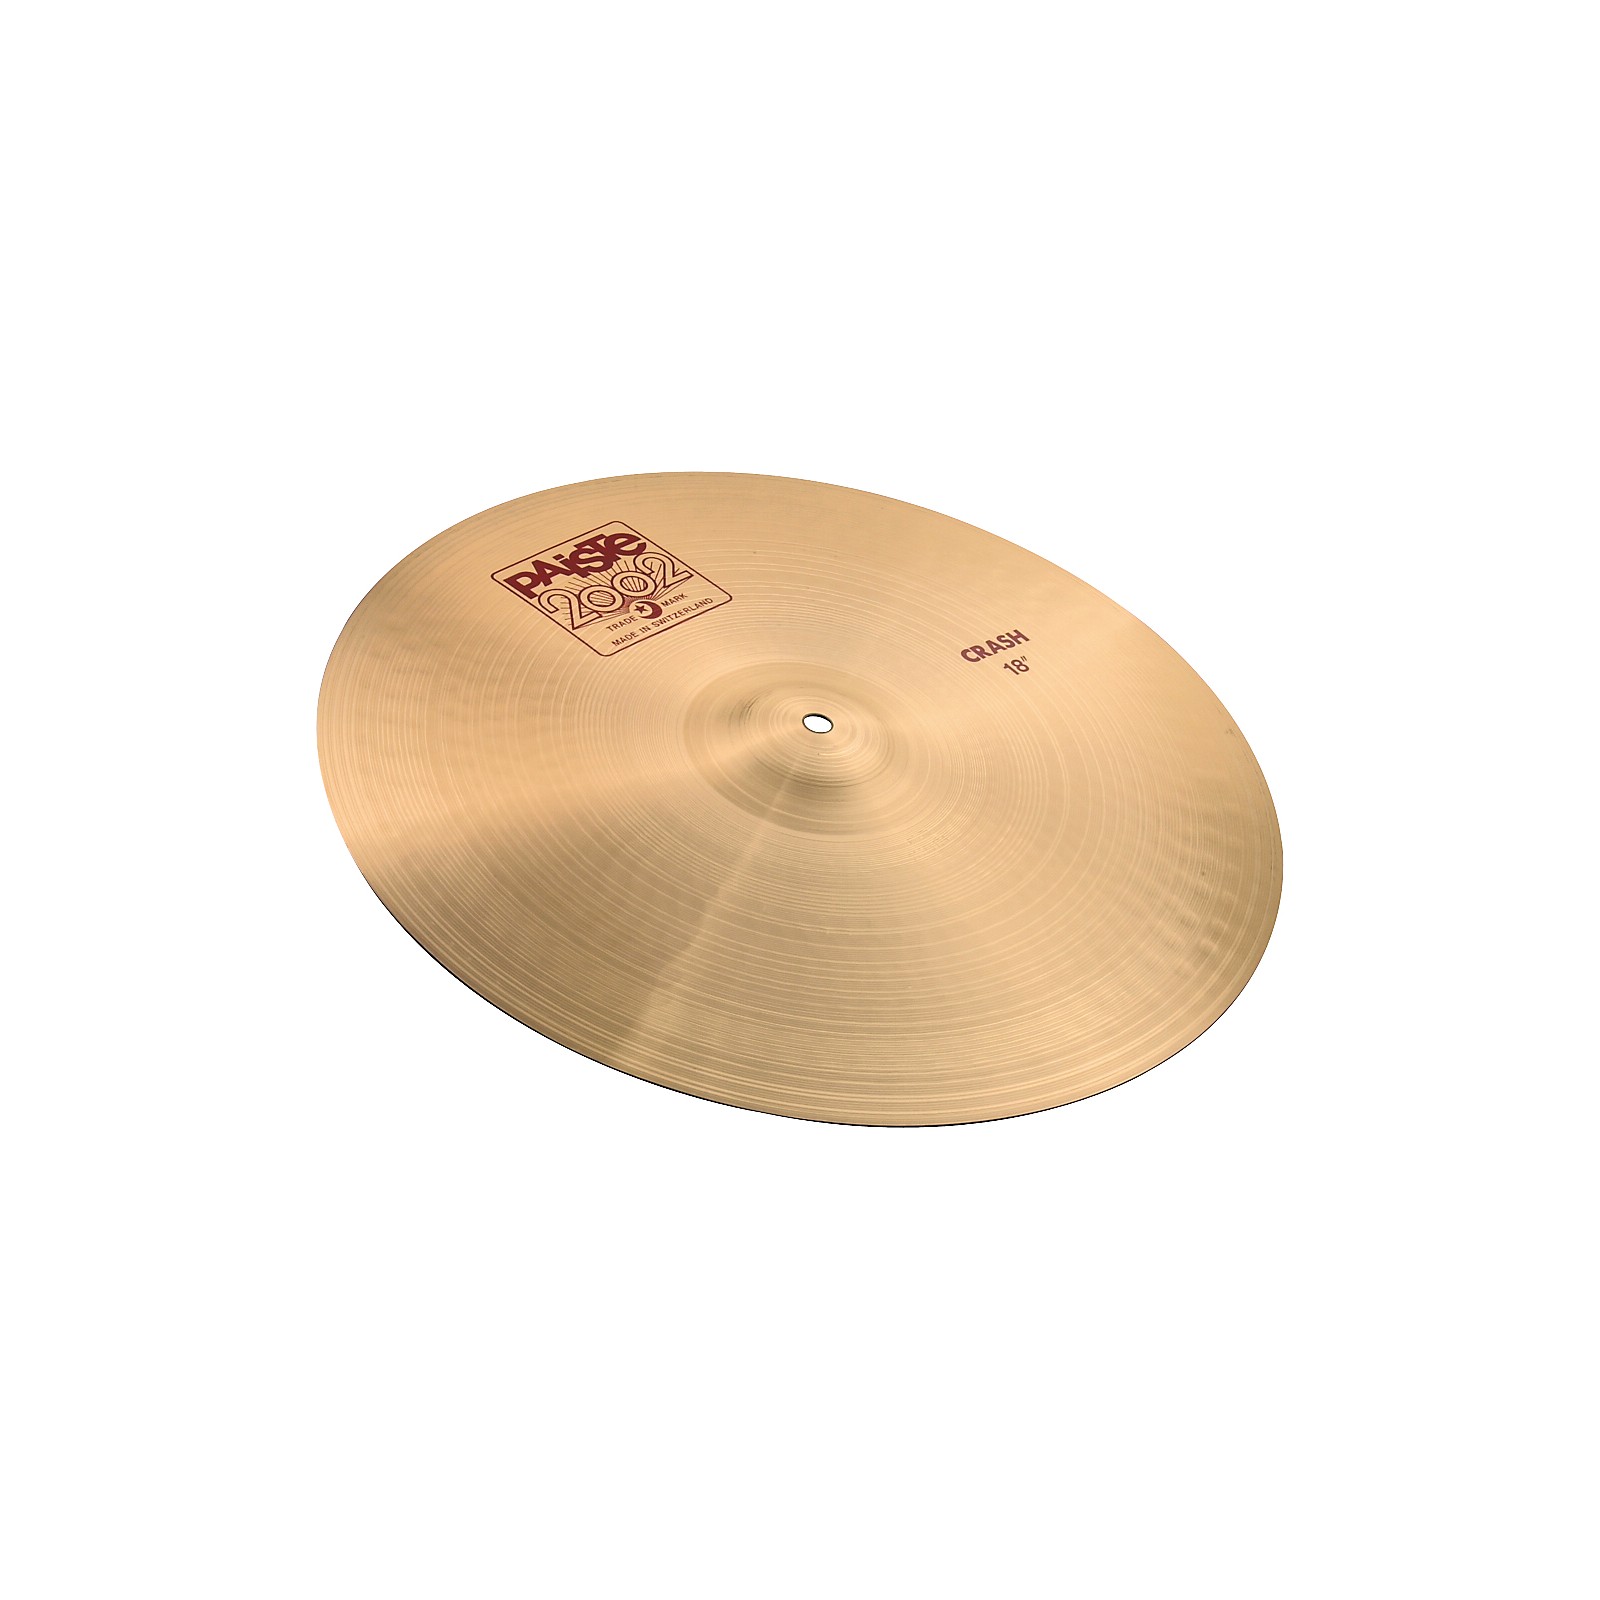 Paiste 2002 Crash Cymbal 19 in.